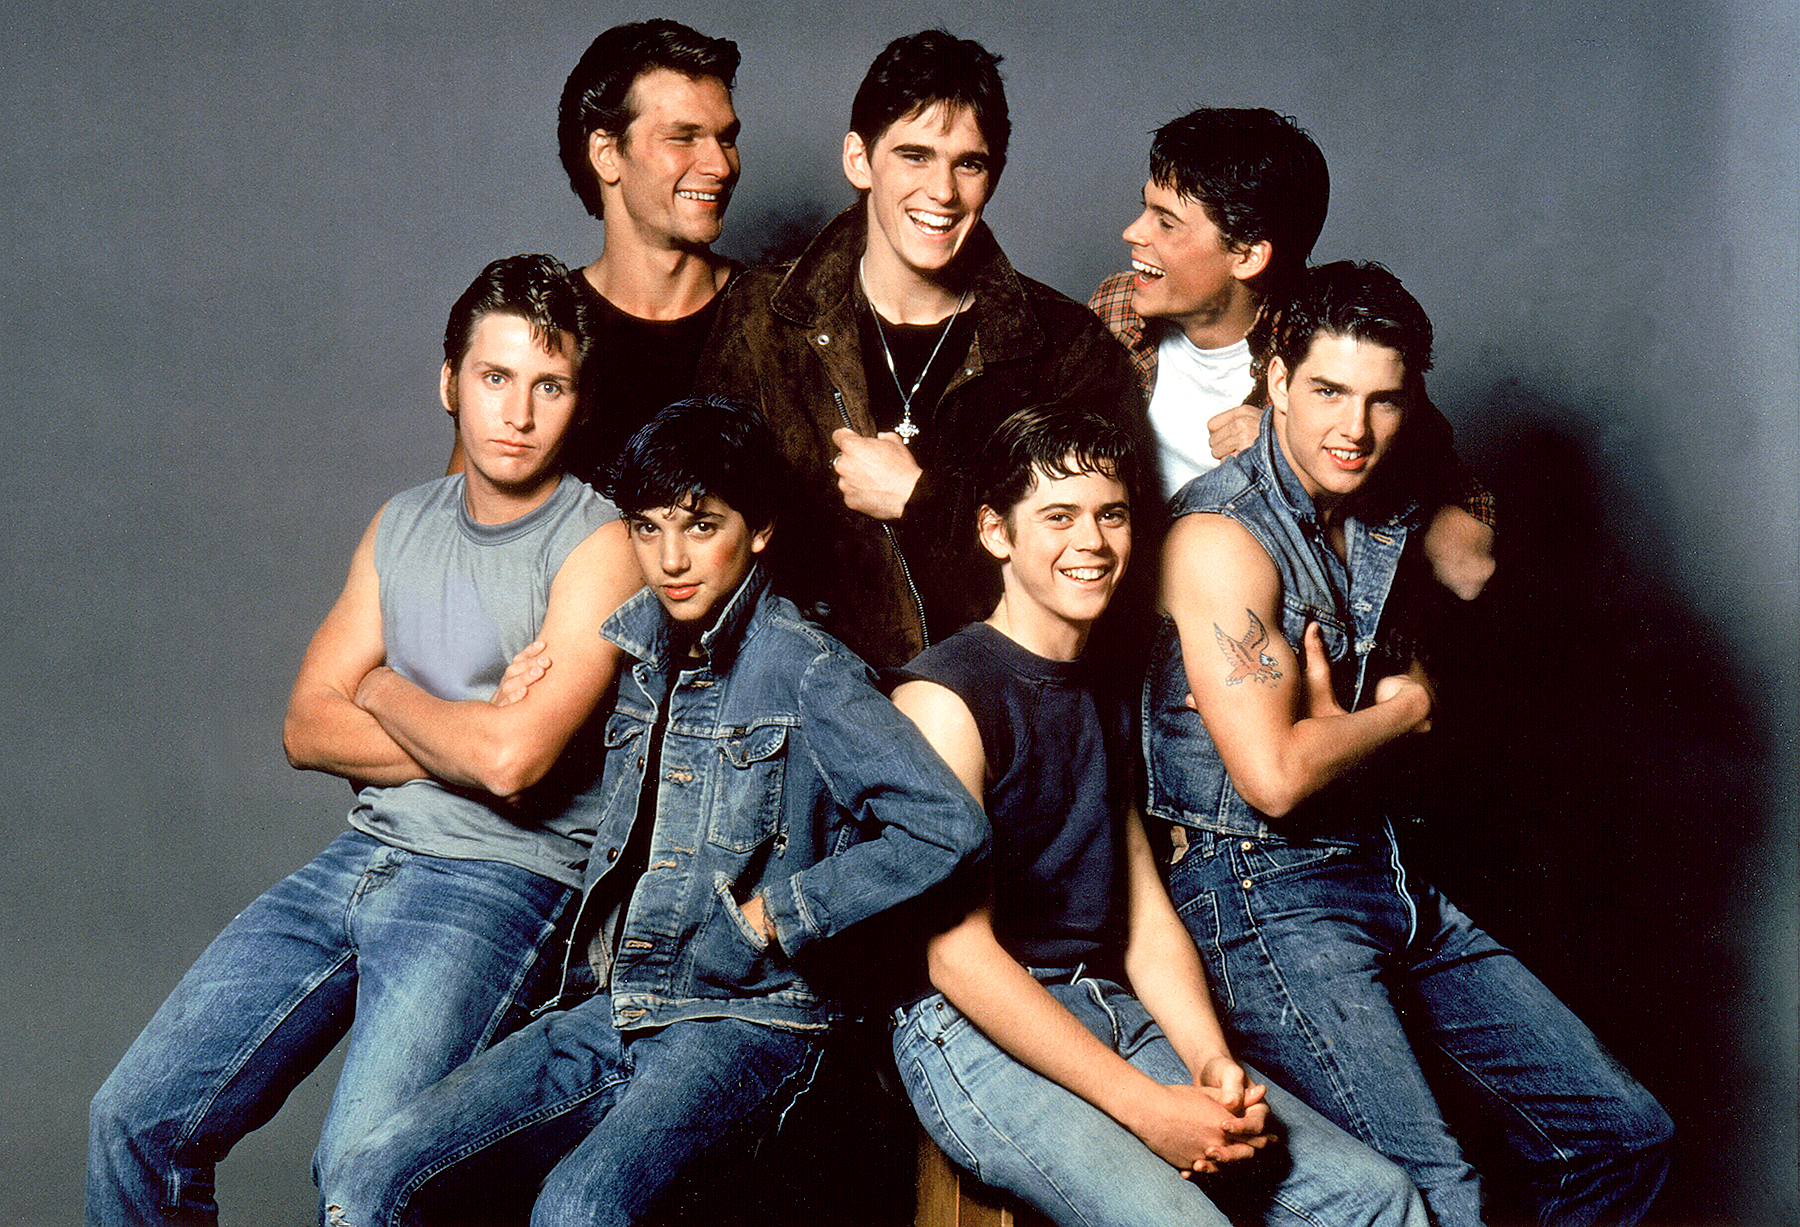 The Outsiders is my favorite book, ever. I re-read it 